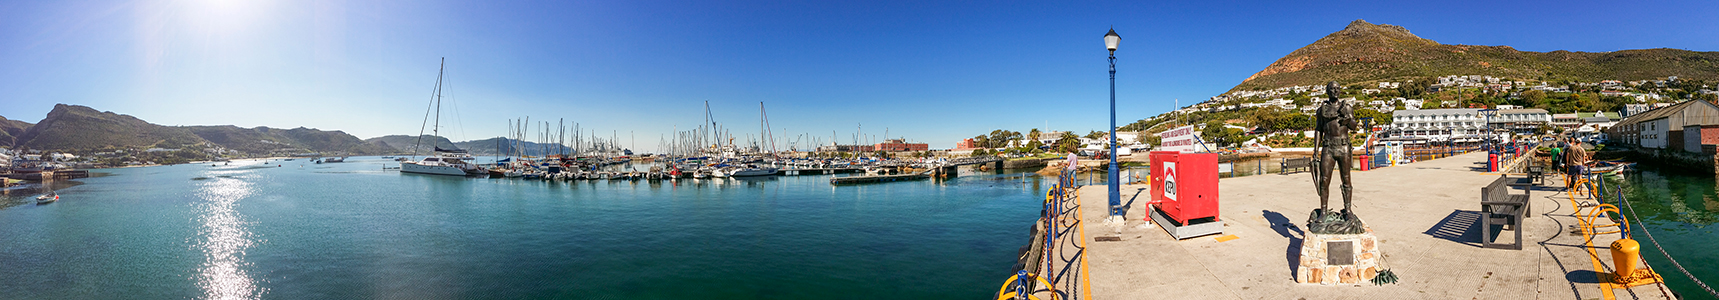 Panoramic photo of a jetty at Simon's Town, South Africa.